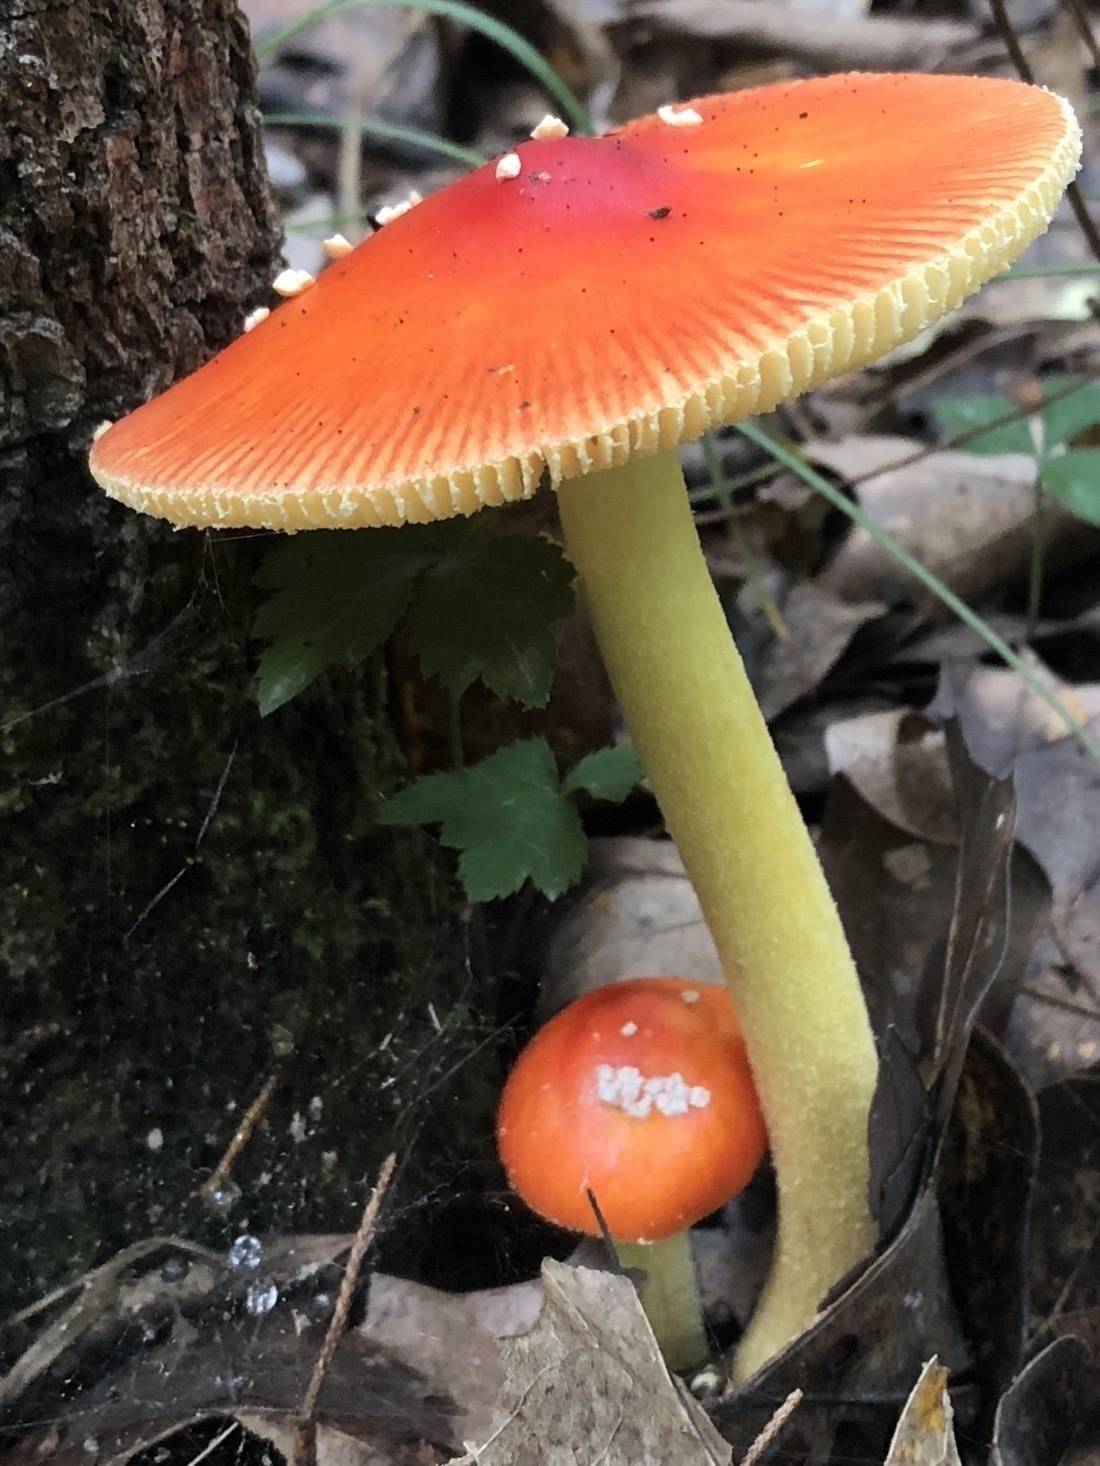 a red mushroom with a white stem growing out of the forest floor￼